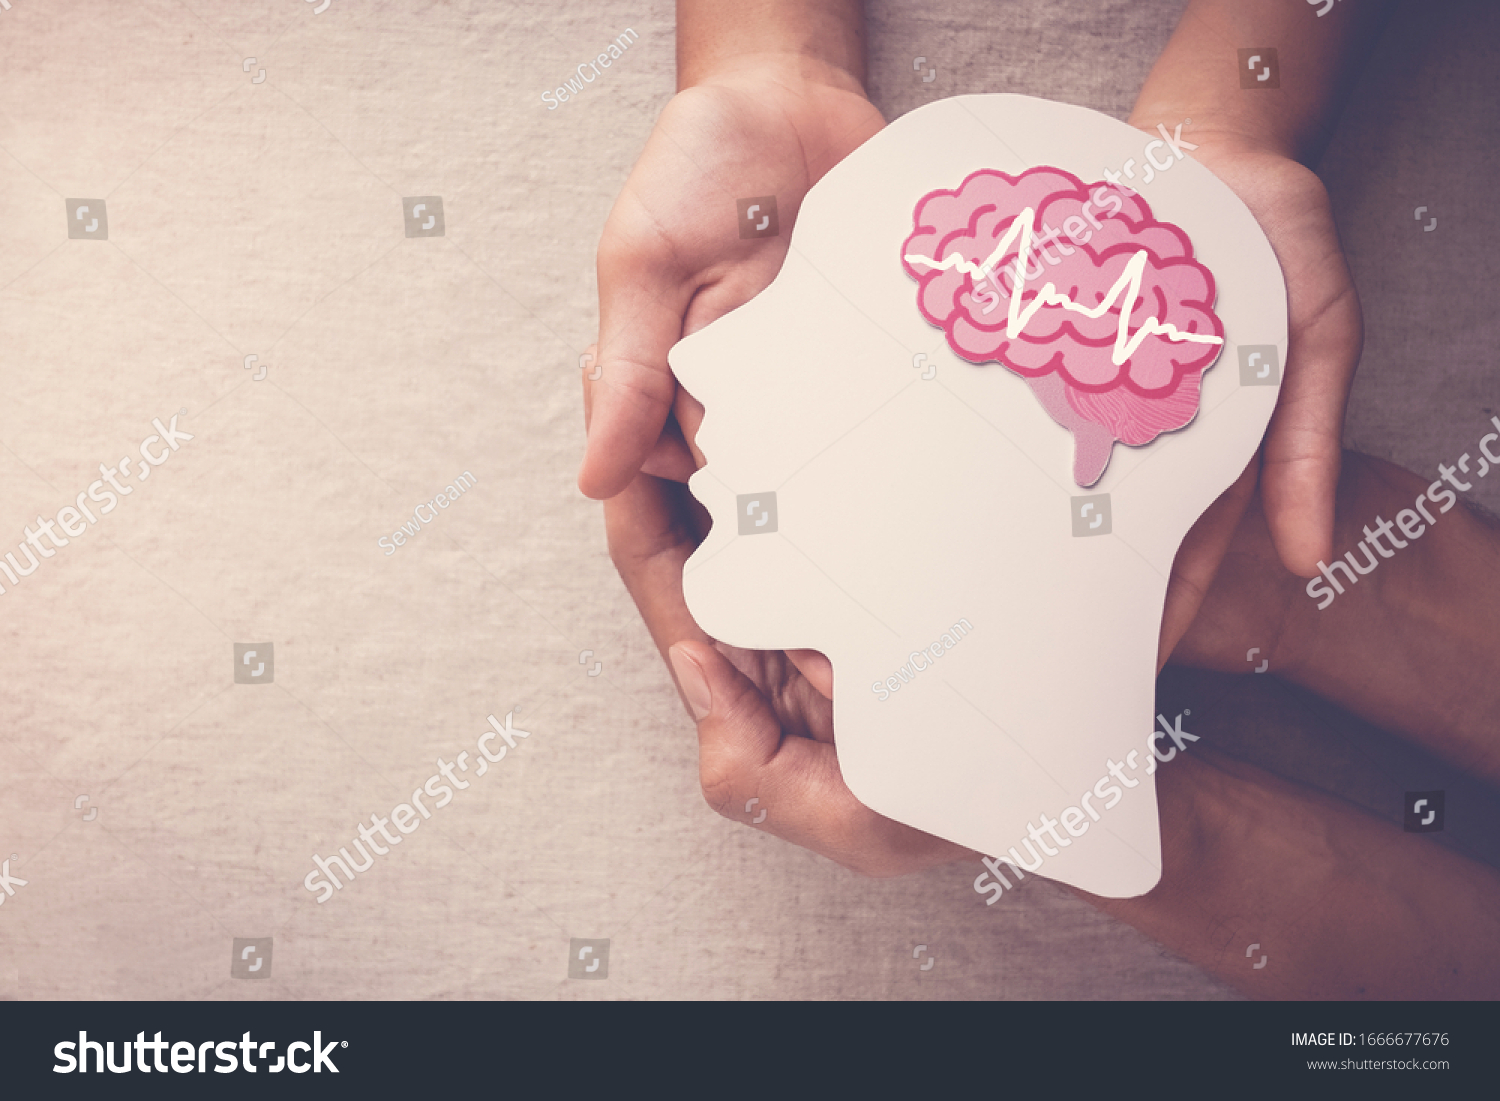 Adult and child hands holding encephalography brain paper cutout,autism, Stroke, Epilepsy and alzheimer awareness, seizure disorder, stroke, ADHD, world mental health day concept #1666677676